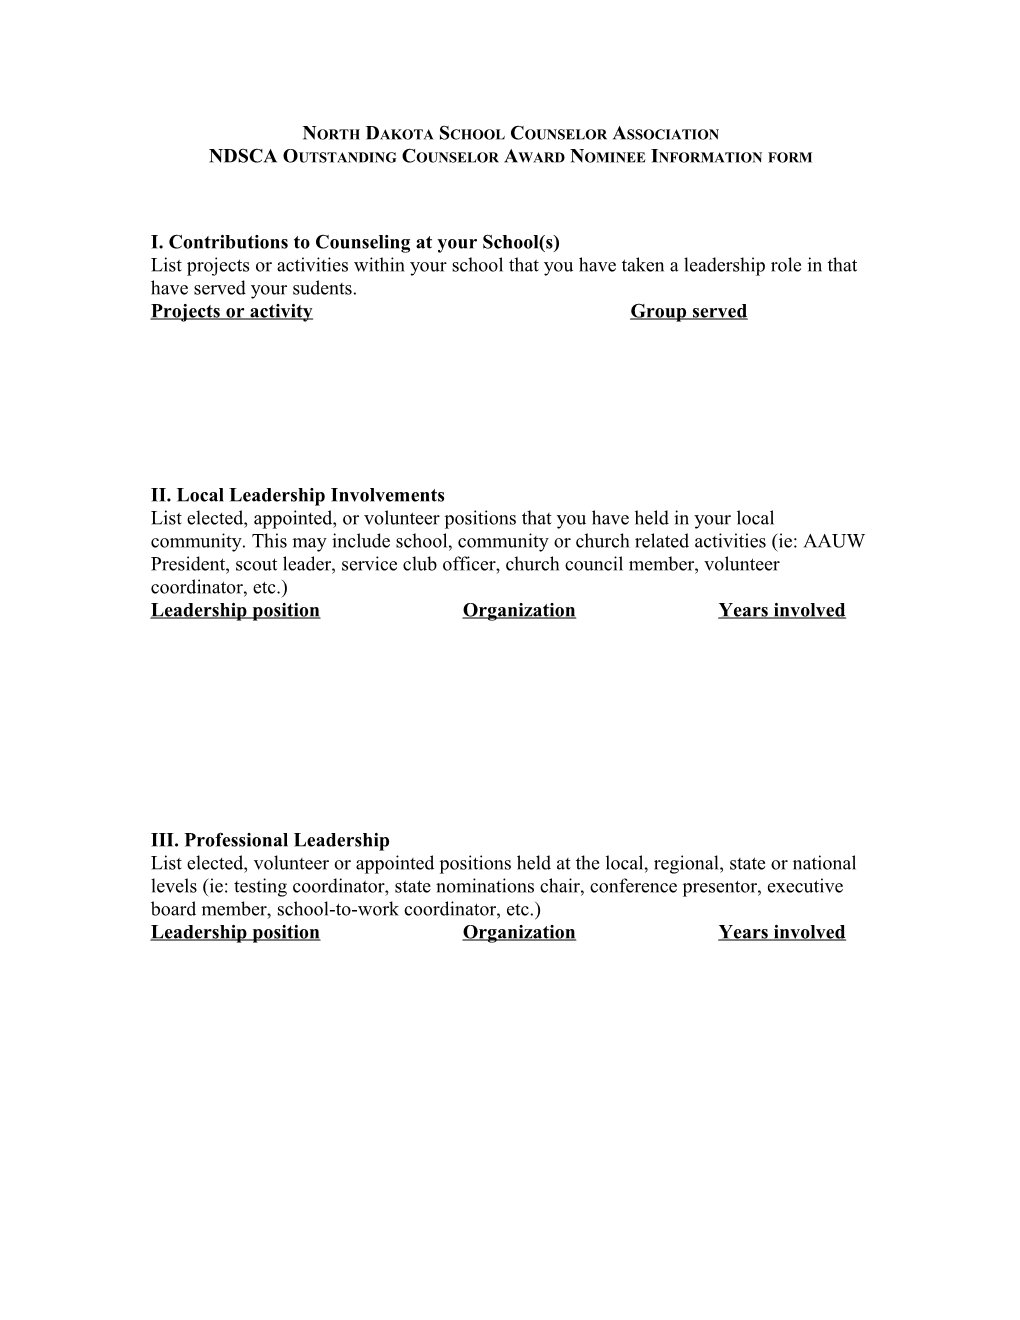 NDSCA Outstanding Counselor Form